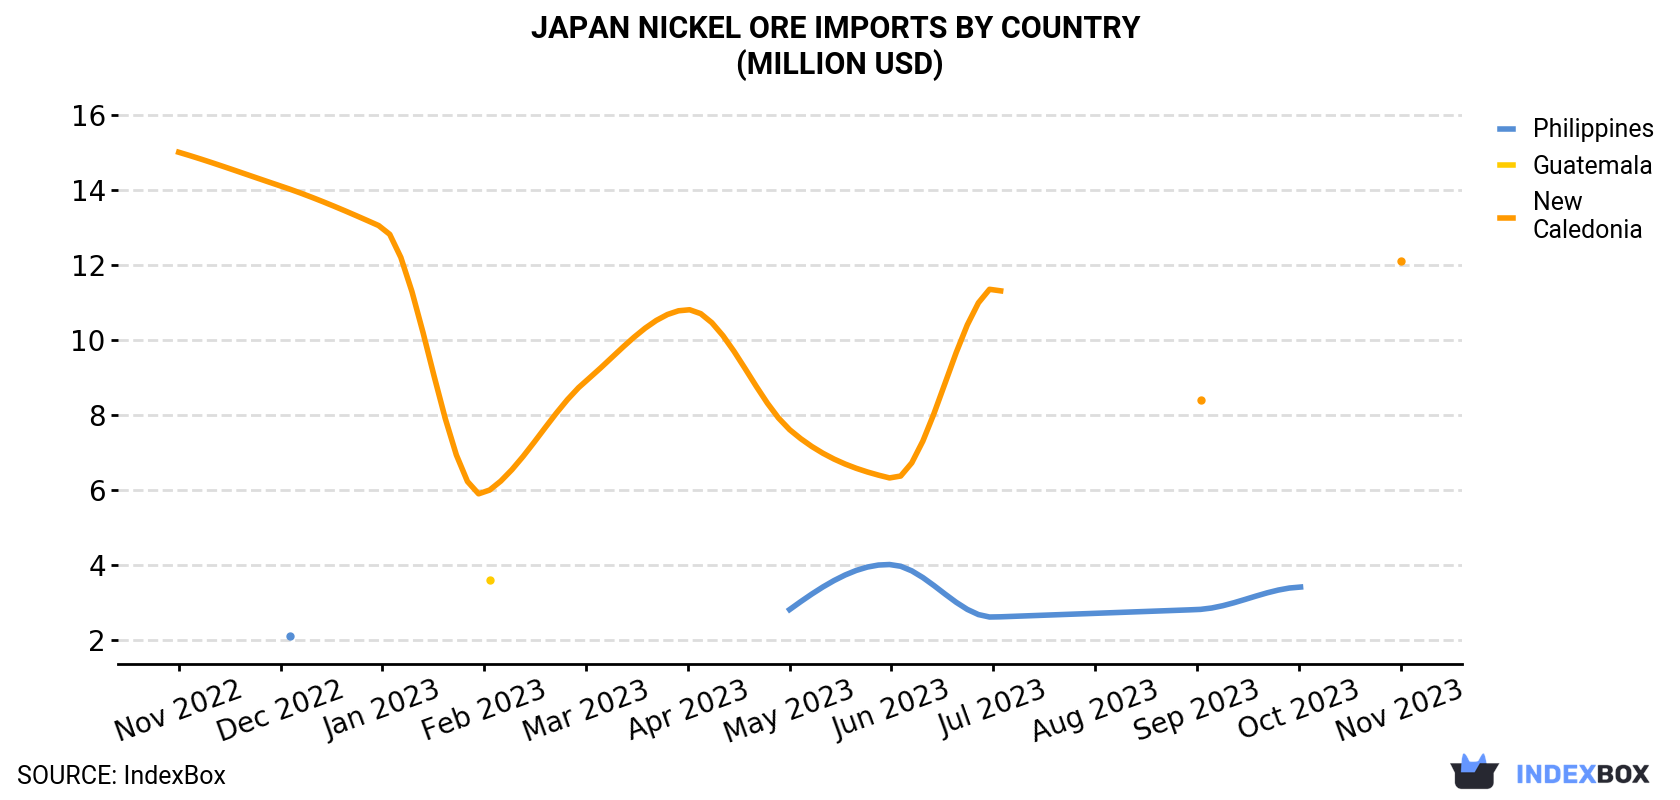 Japan Nickel Ore Imports By Country (Million USD)